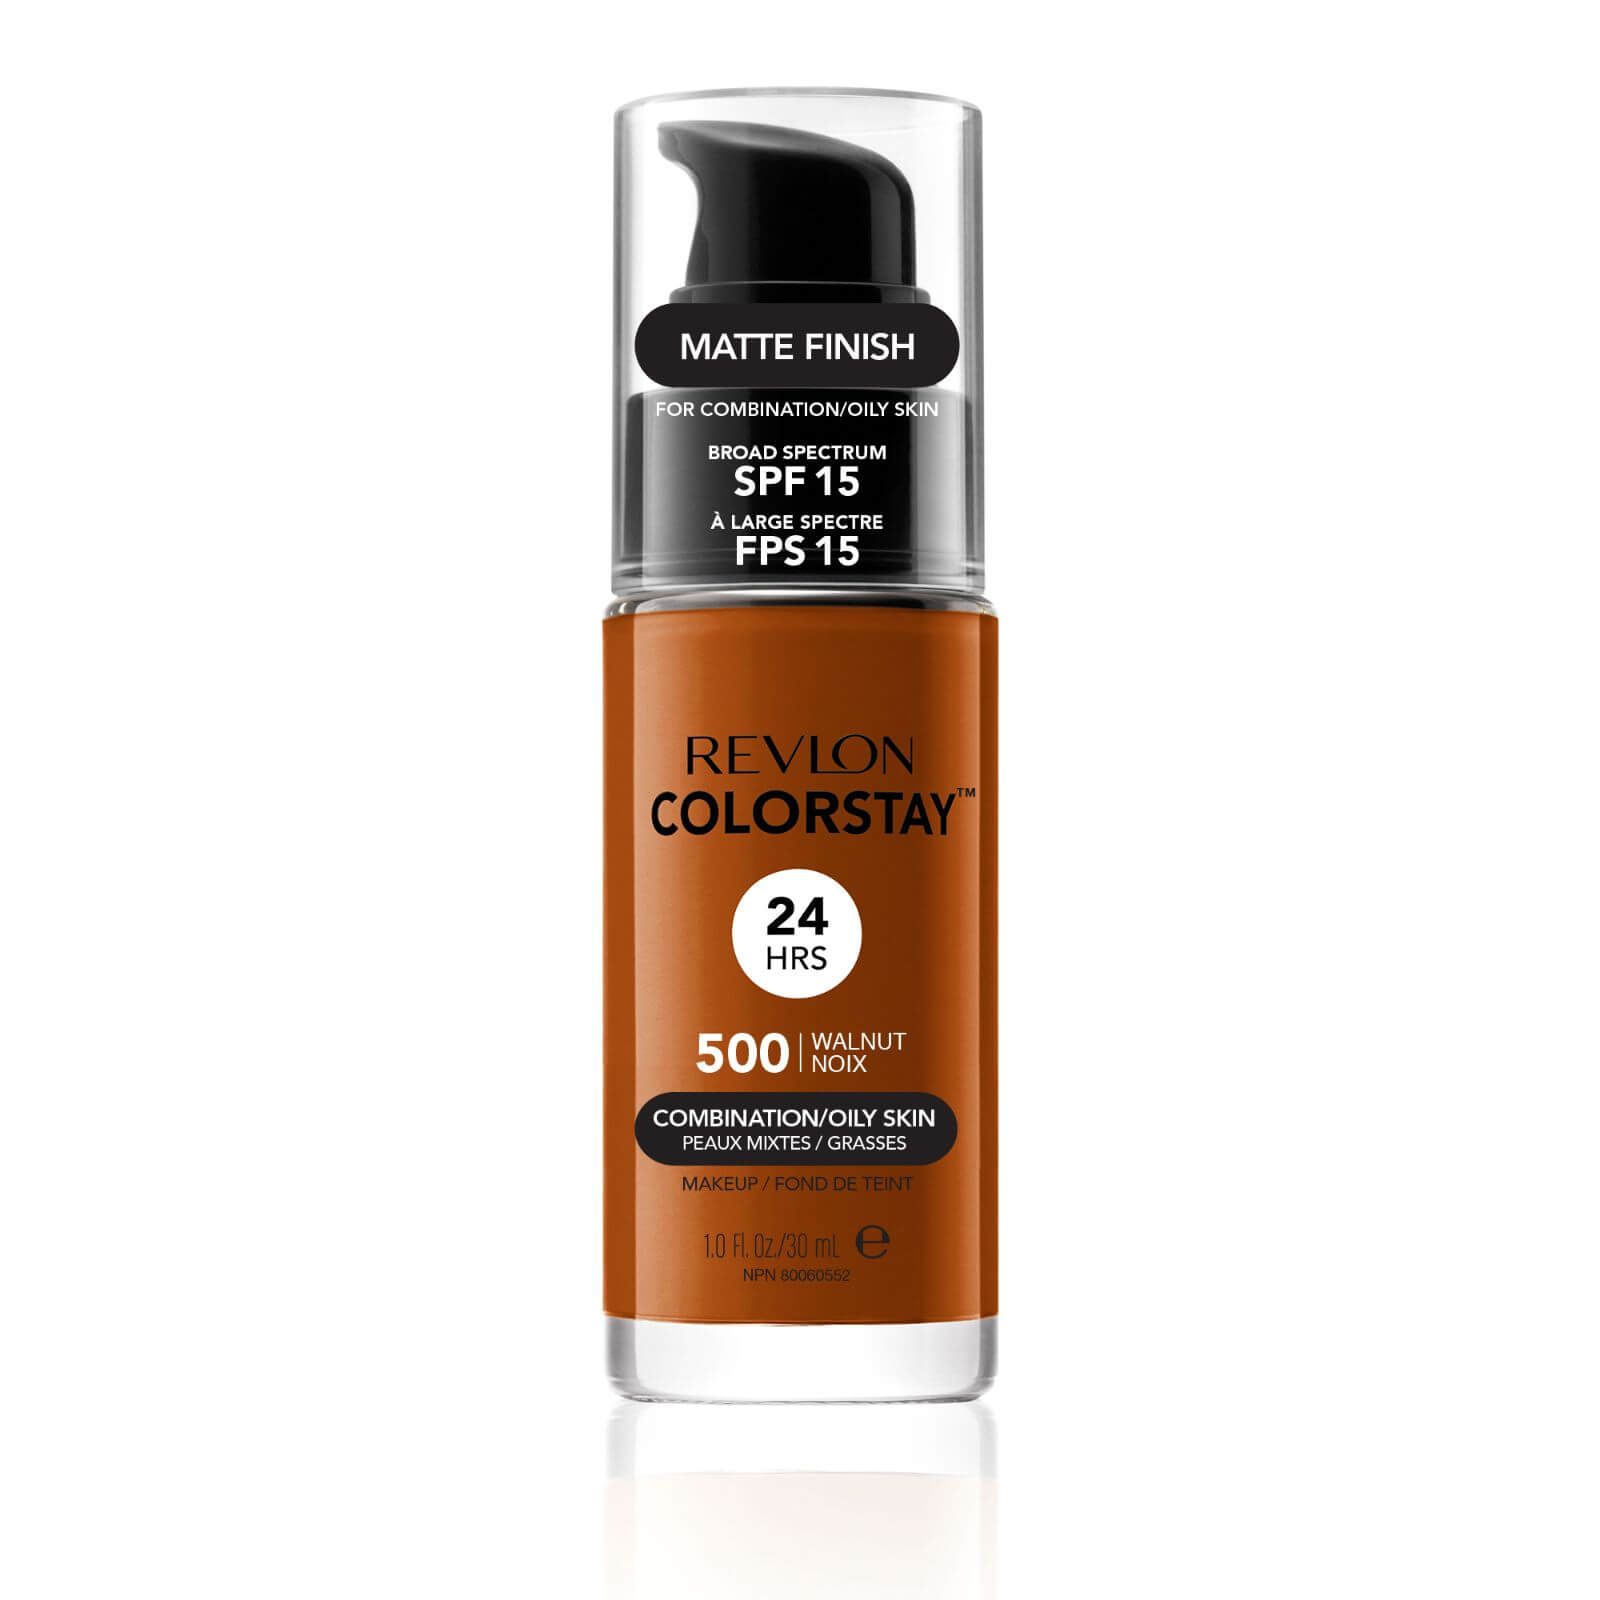 Revlon ColorStay Make-Up Foundation for Combination/Oily Skin (Various Shades) - Walnut